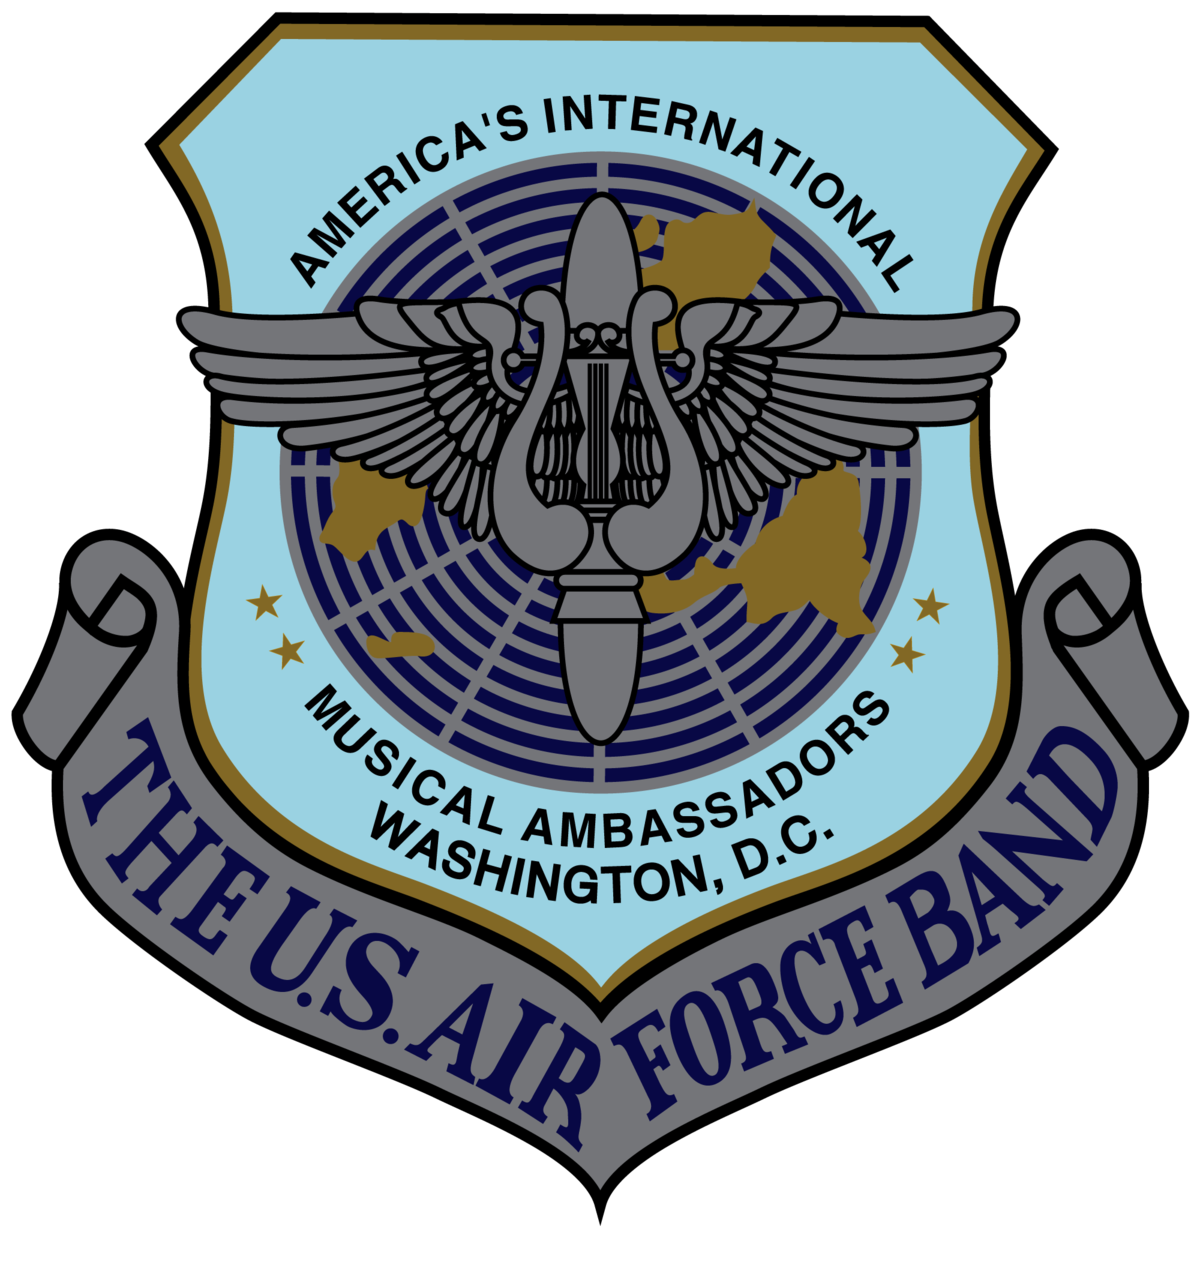 United States Air Force Band.